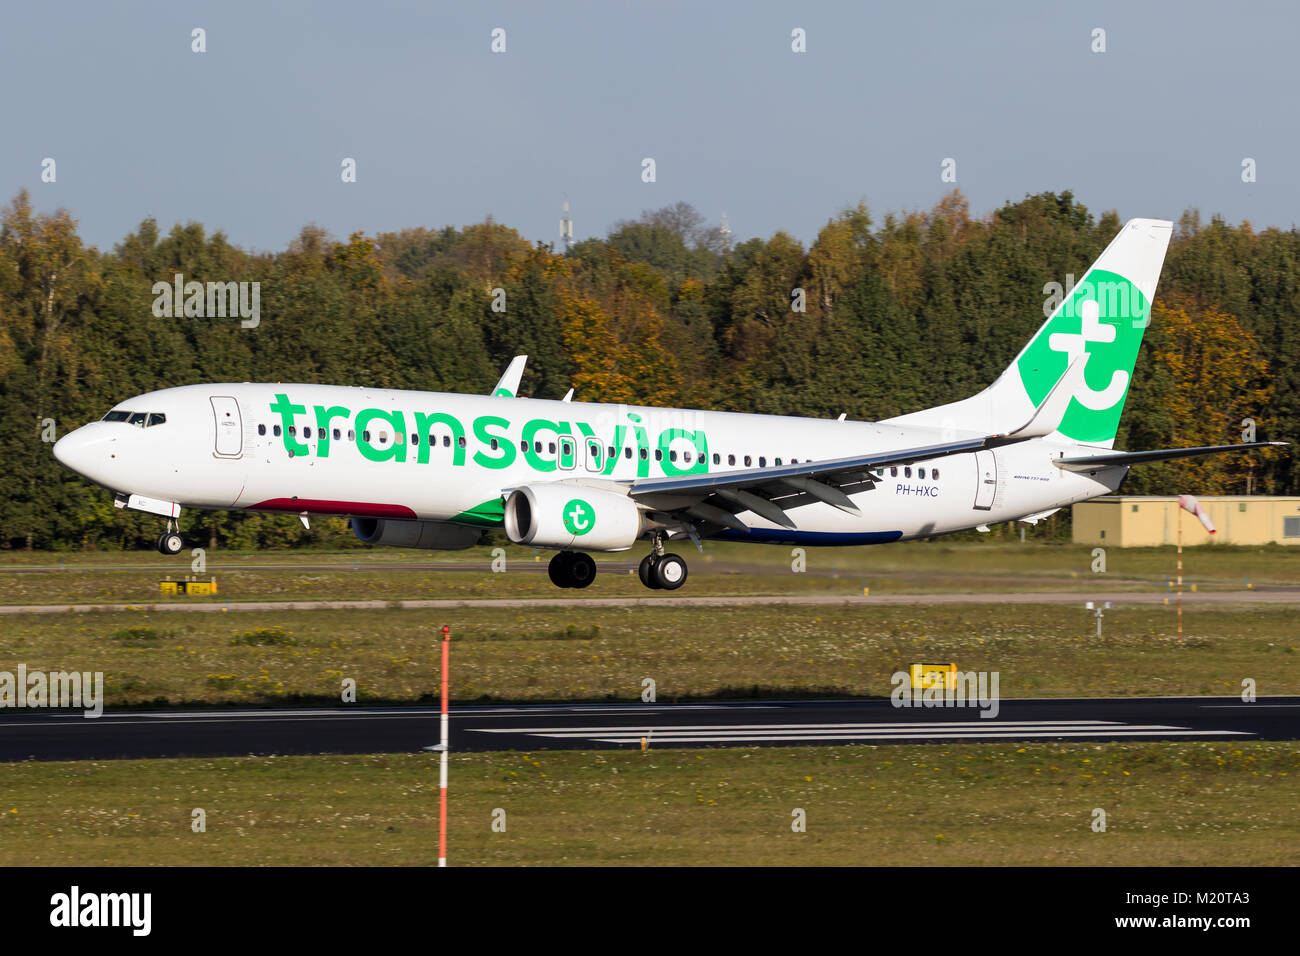 EINDHOVEN, THE NETHERLANDS - OCT 27, 2017: Transavia airlines Boeing 737 airplane landing on Eindhoven Airport. Stock Photo